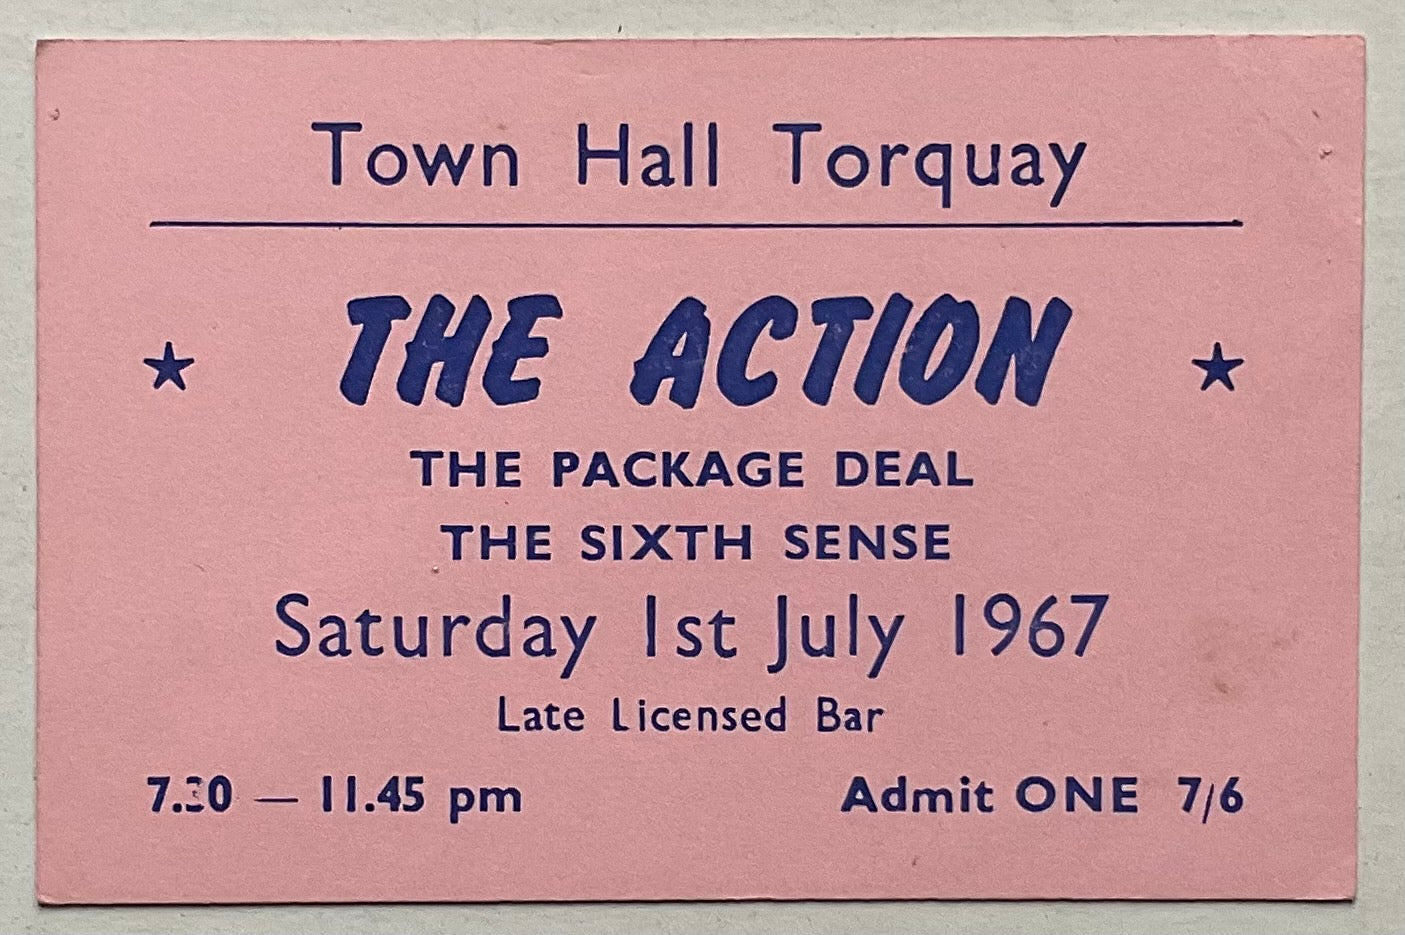 Action Original Used Concert Ticket Torquay Town Hall 1967